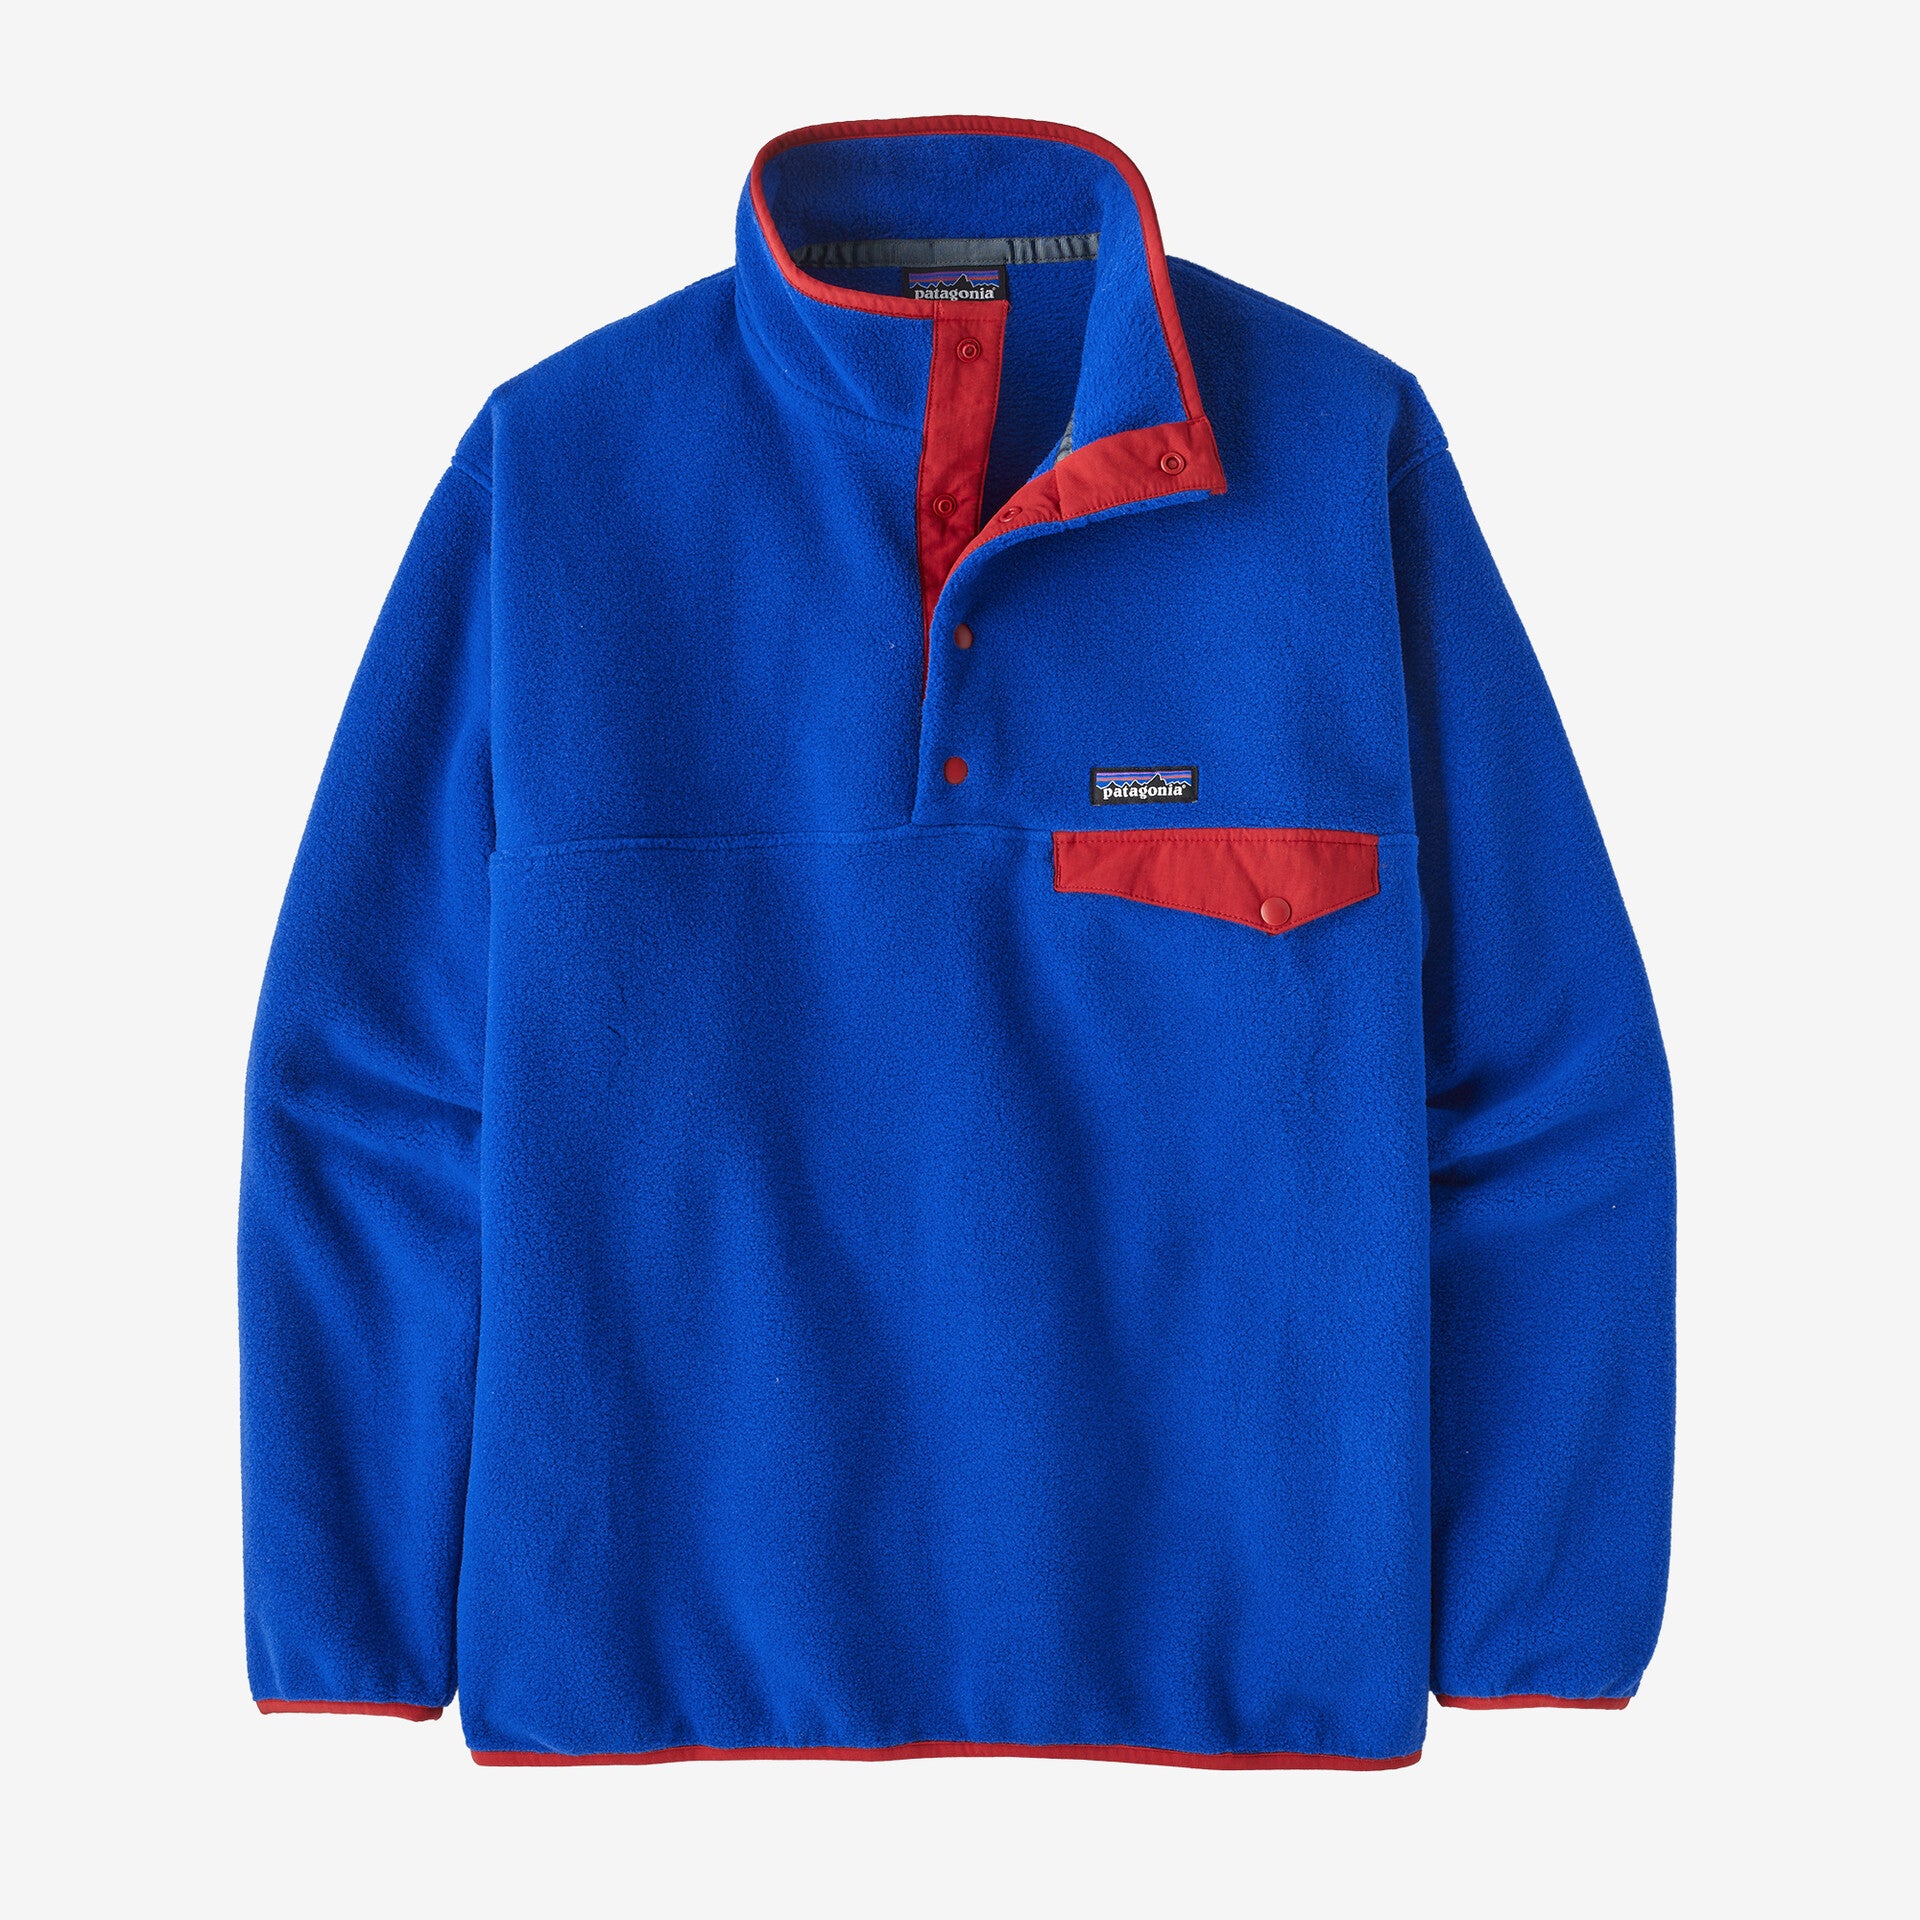 Patagonia Synchilla Snap-T Pullover - Passage Blue - XL - Men